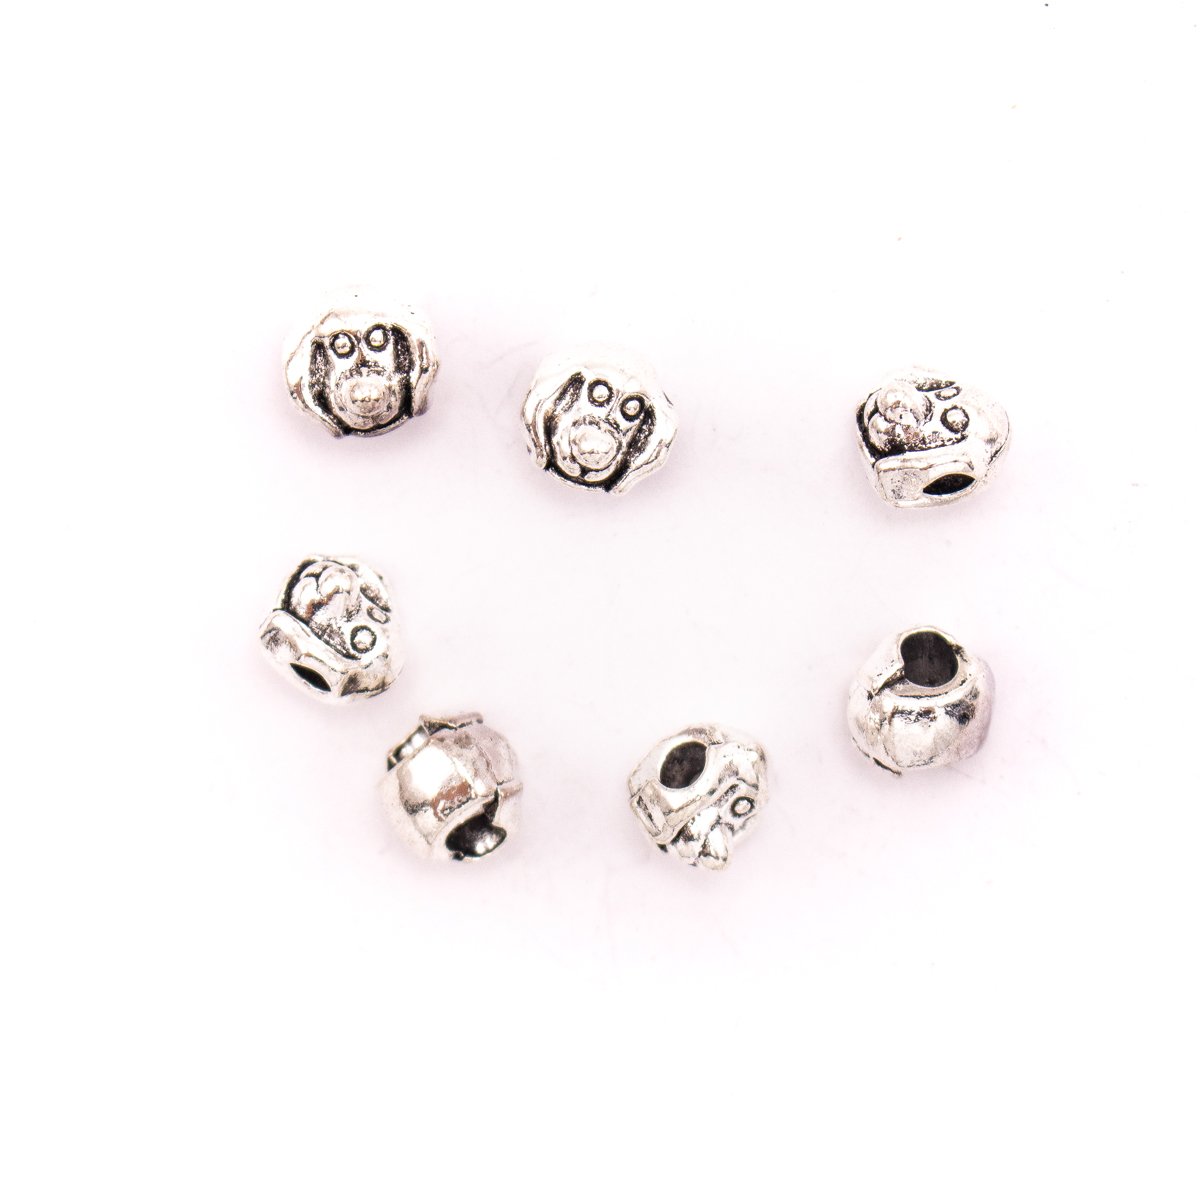 10PCS For 5mm leather antique silver zamak 5mm round beads Jewelry supply Findings Components- D-5-5-159